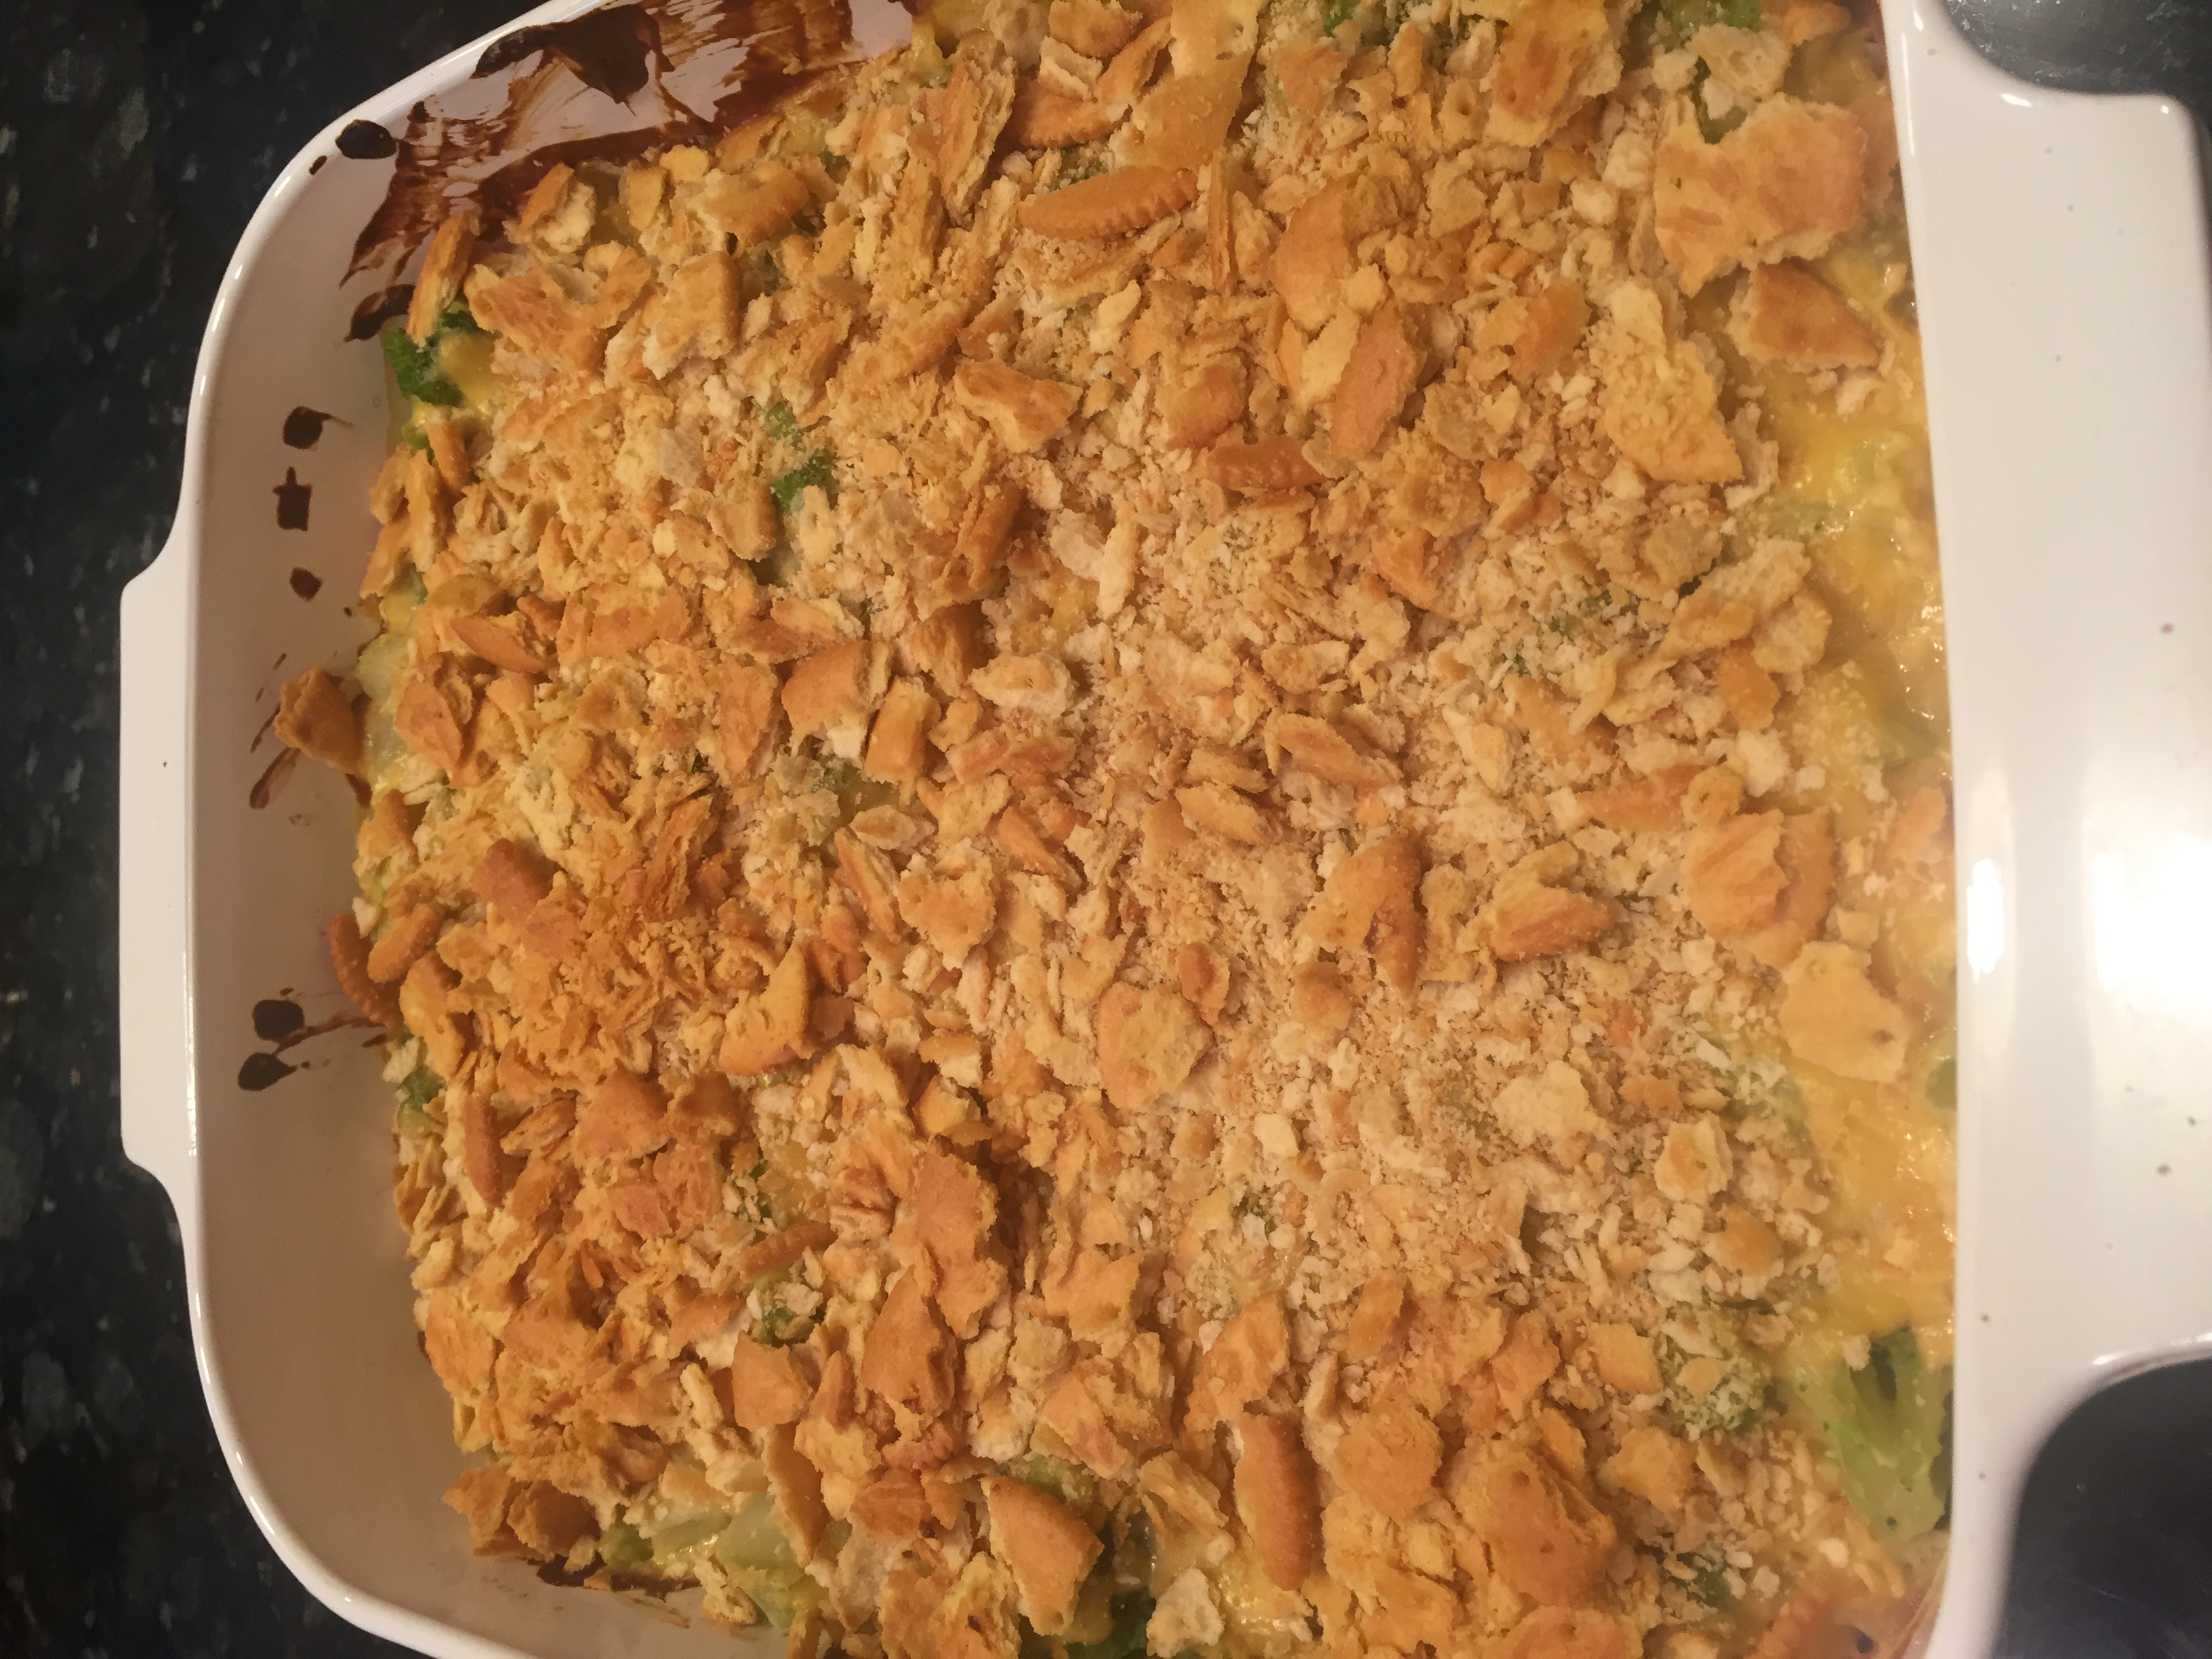 Image: Homemade broccoli cheese casserole. Photo by The Signal reporter Shelby Starr